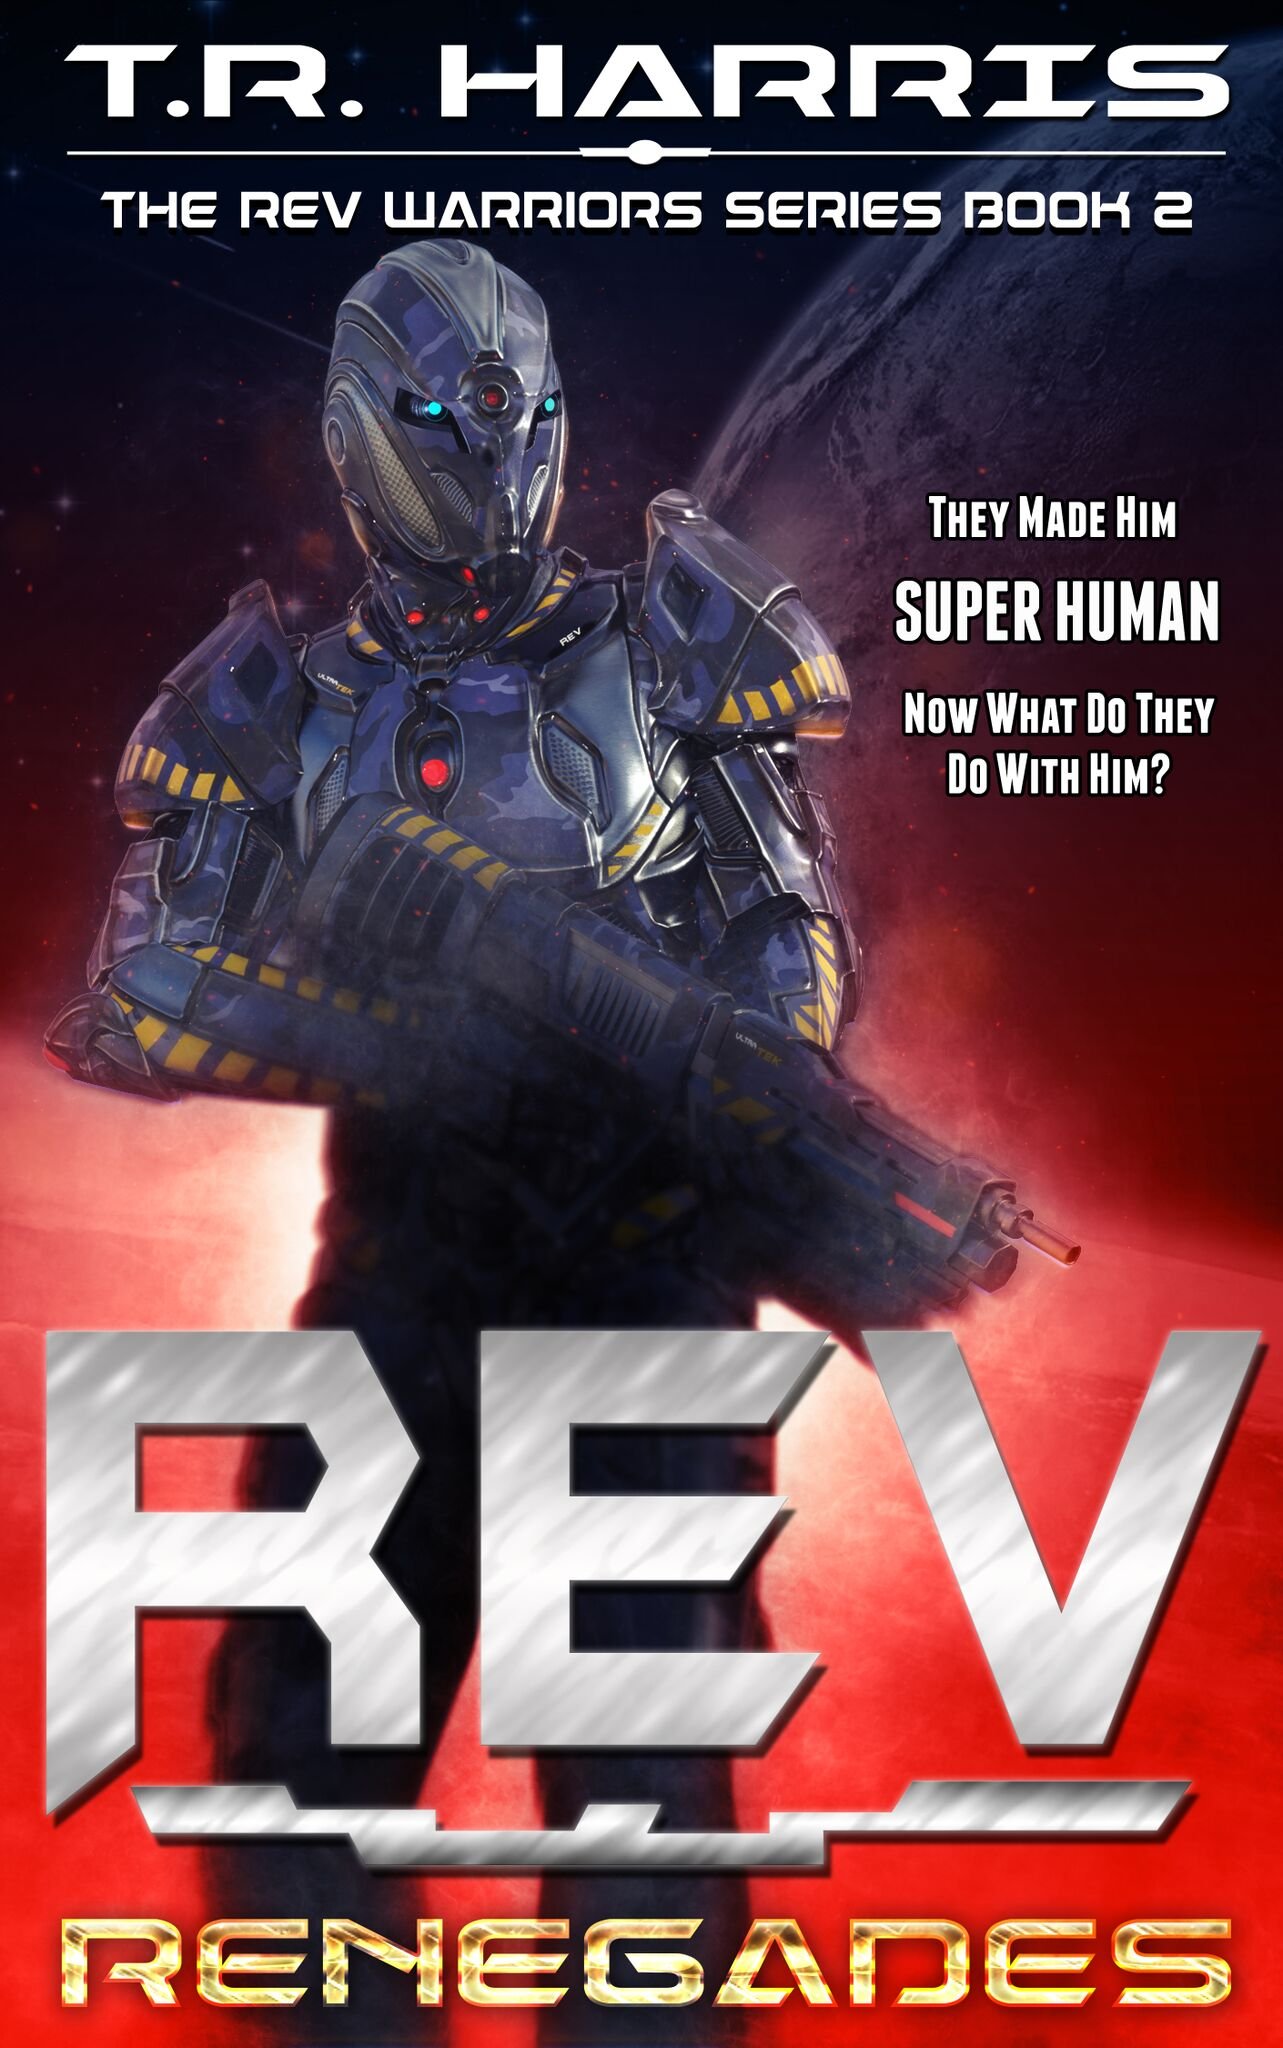 REV: Renegades (Genetically-Altered Marines of the Future): REV Warriors Series Book 2